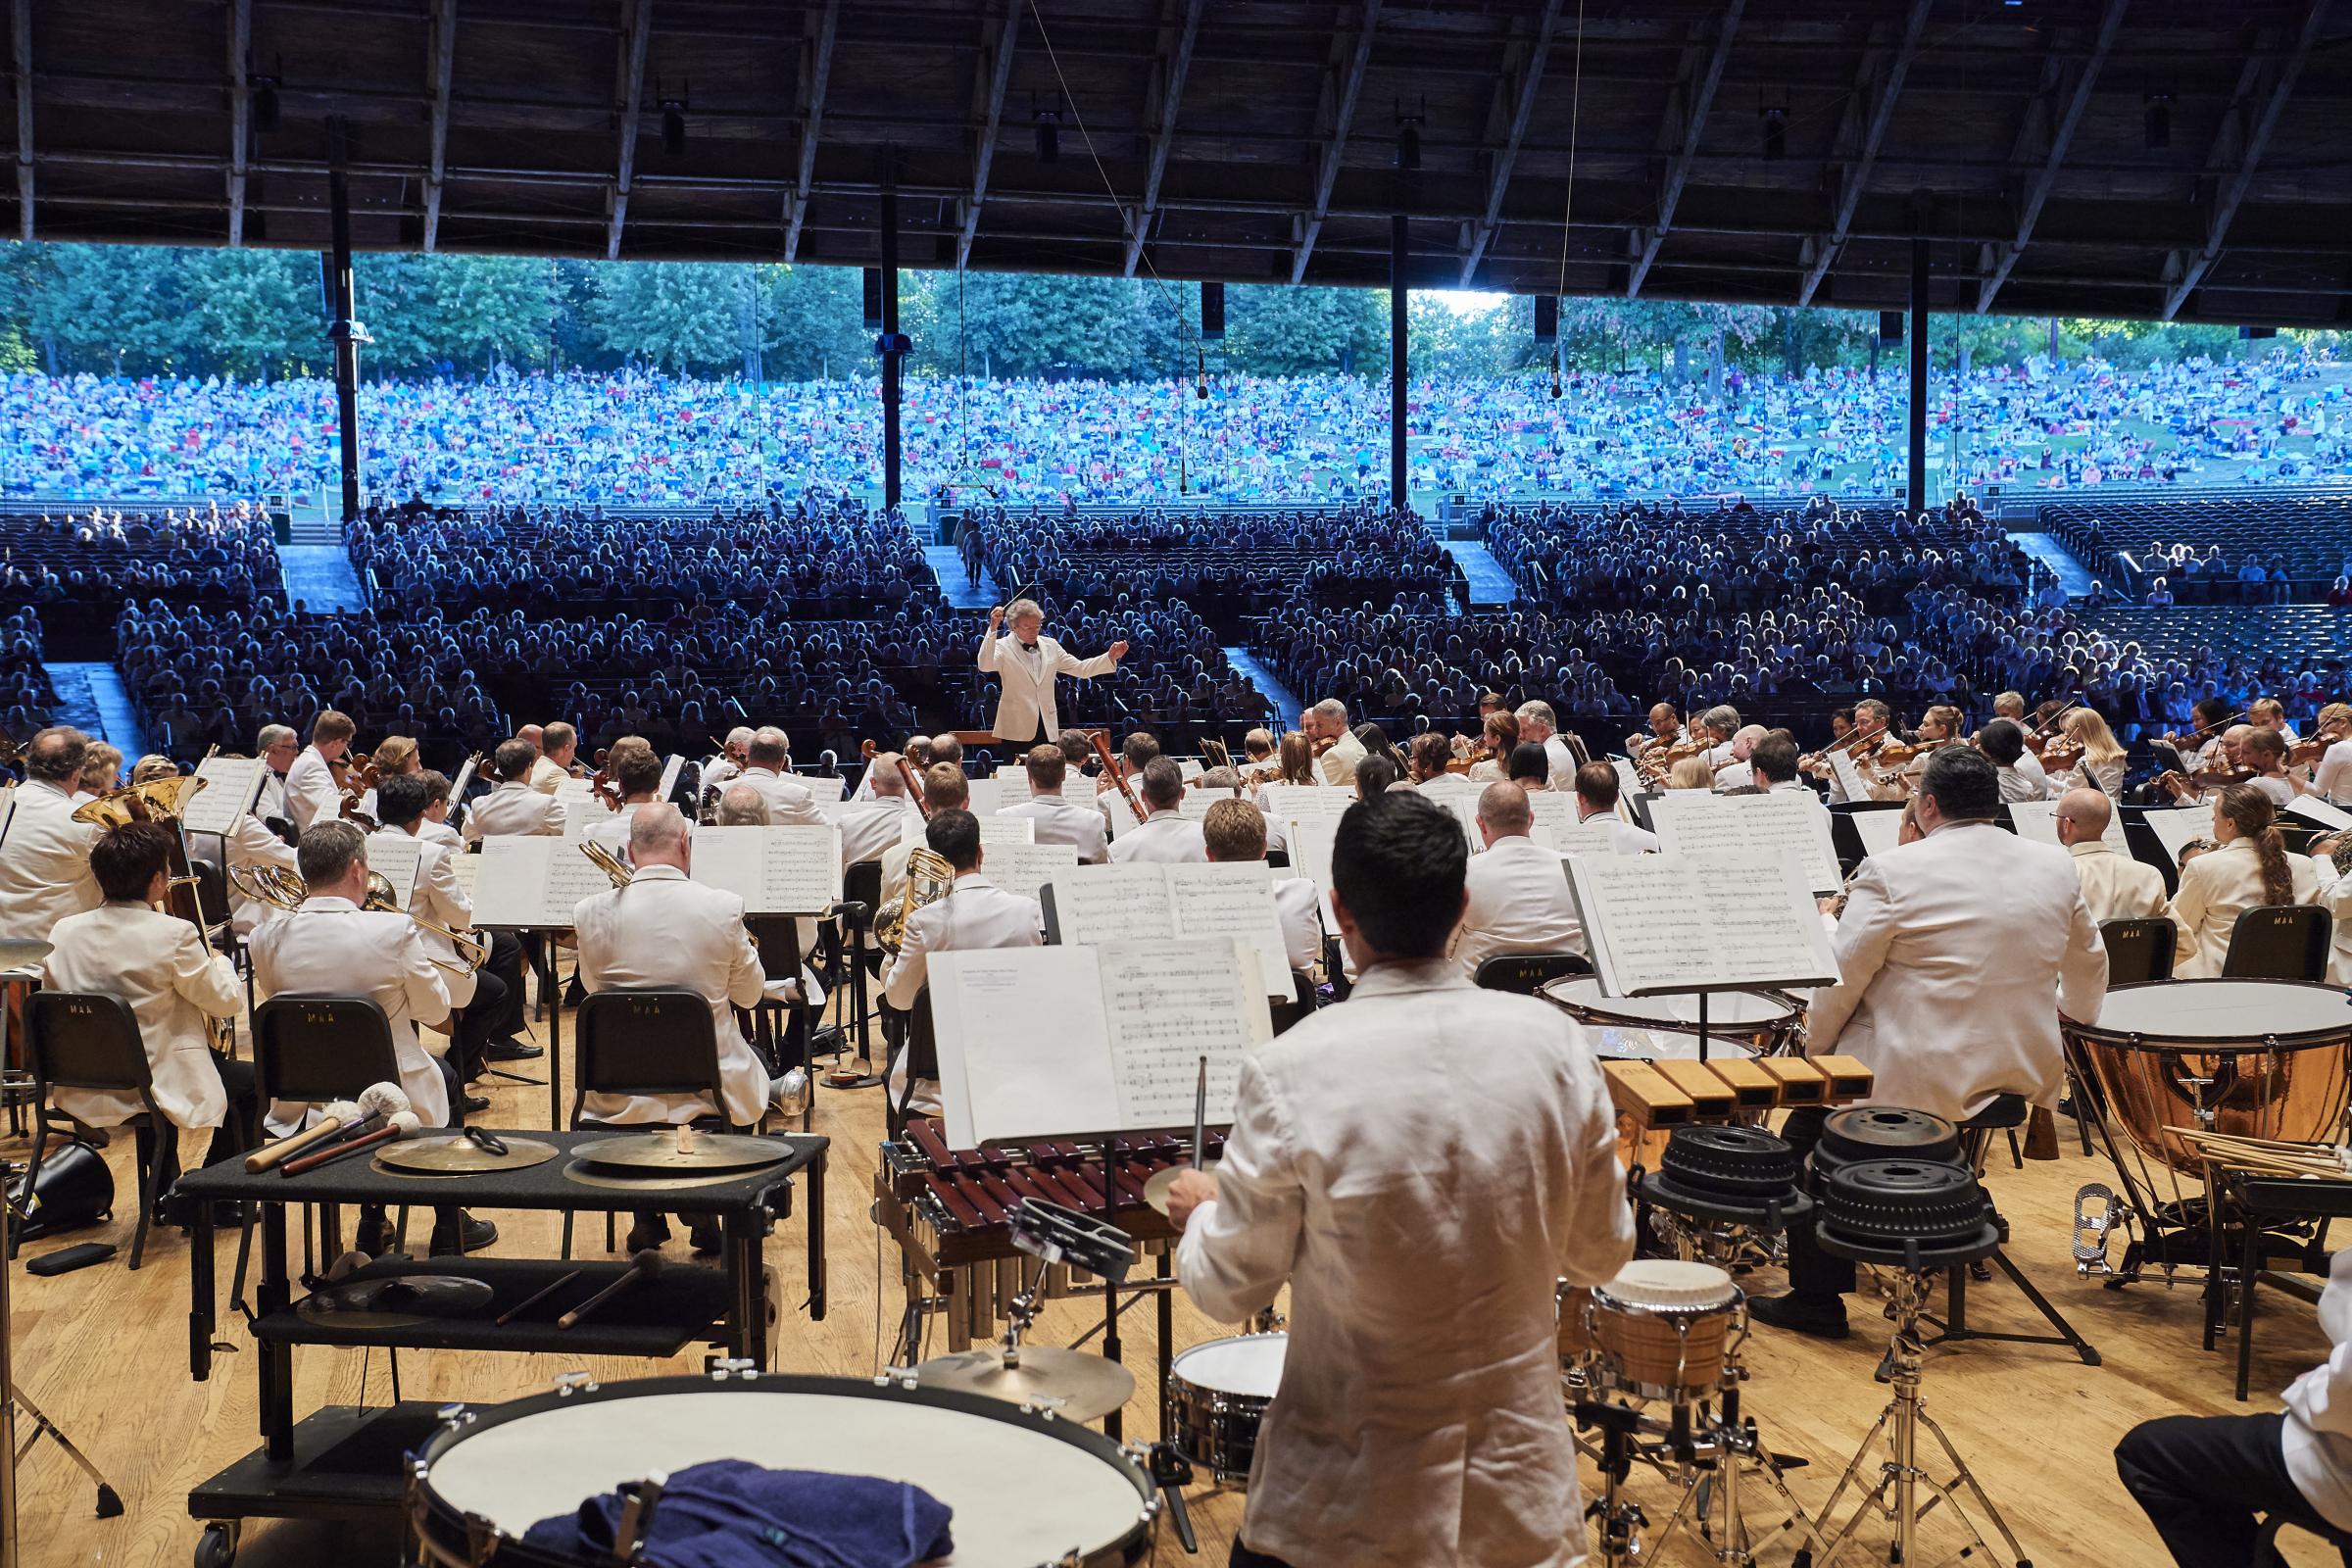 Much More Music to Come with The Cleveland Orchestra at Blossom WKSU